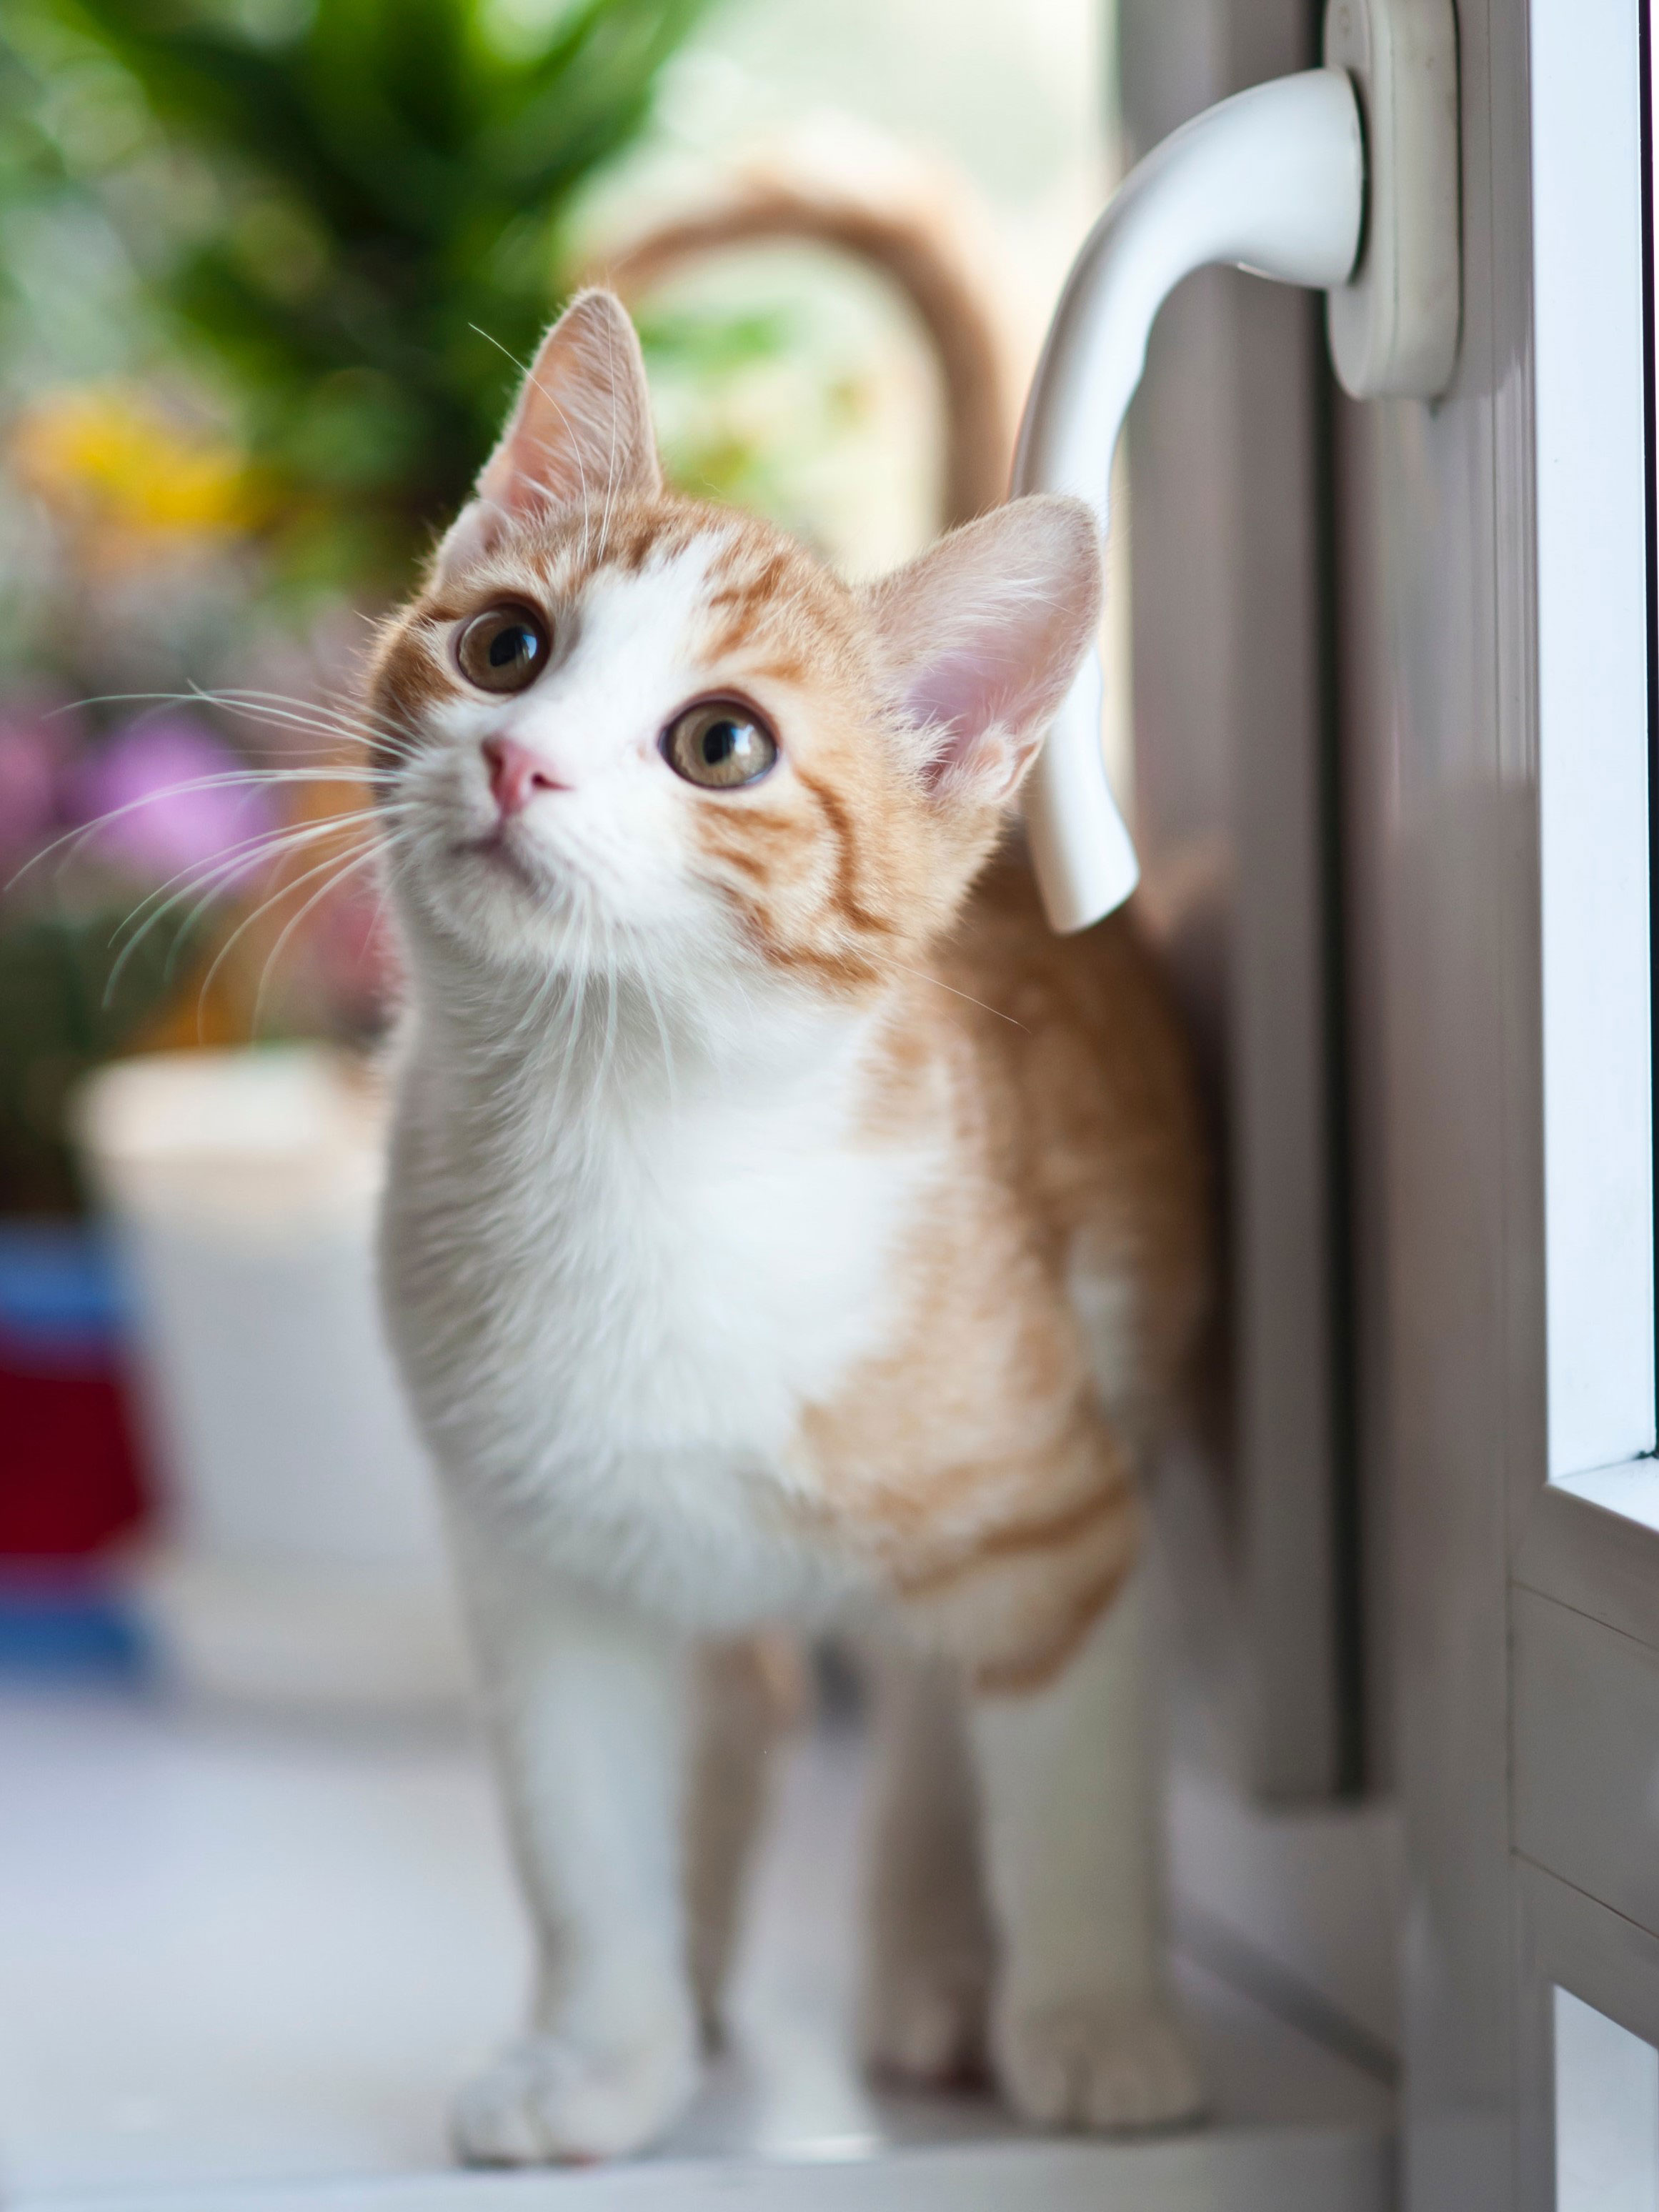 A kitten is looking curious next to a door